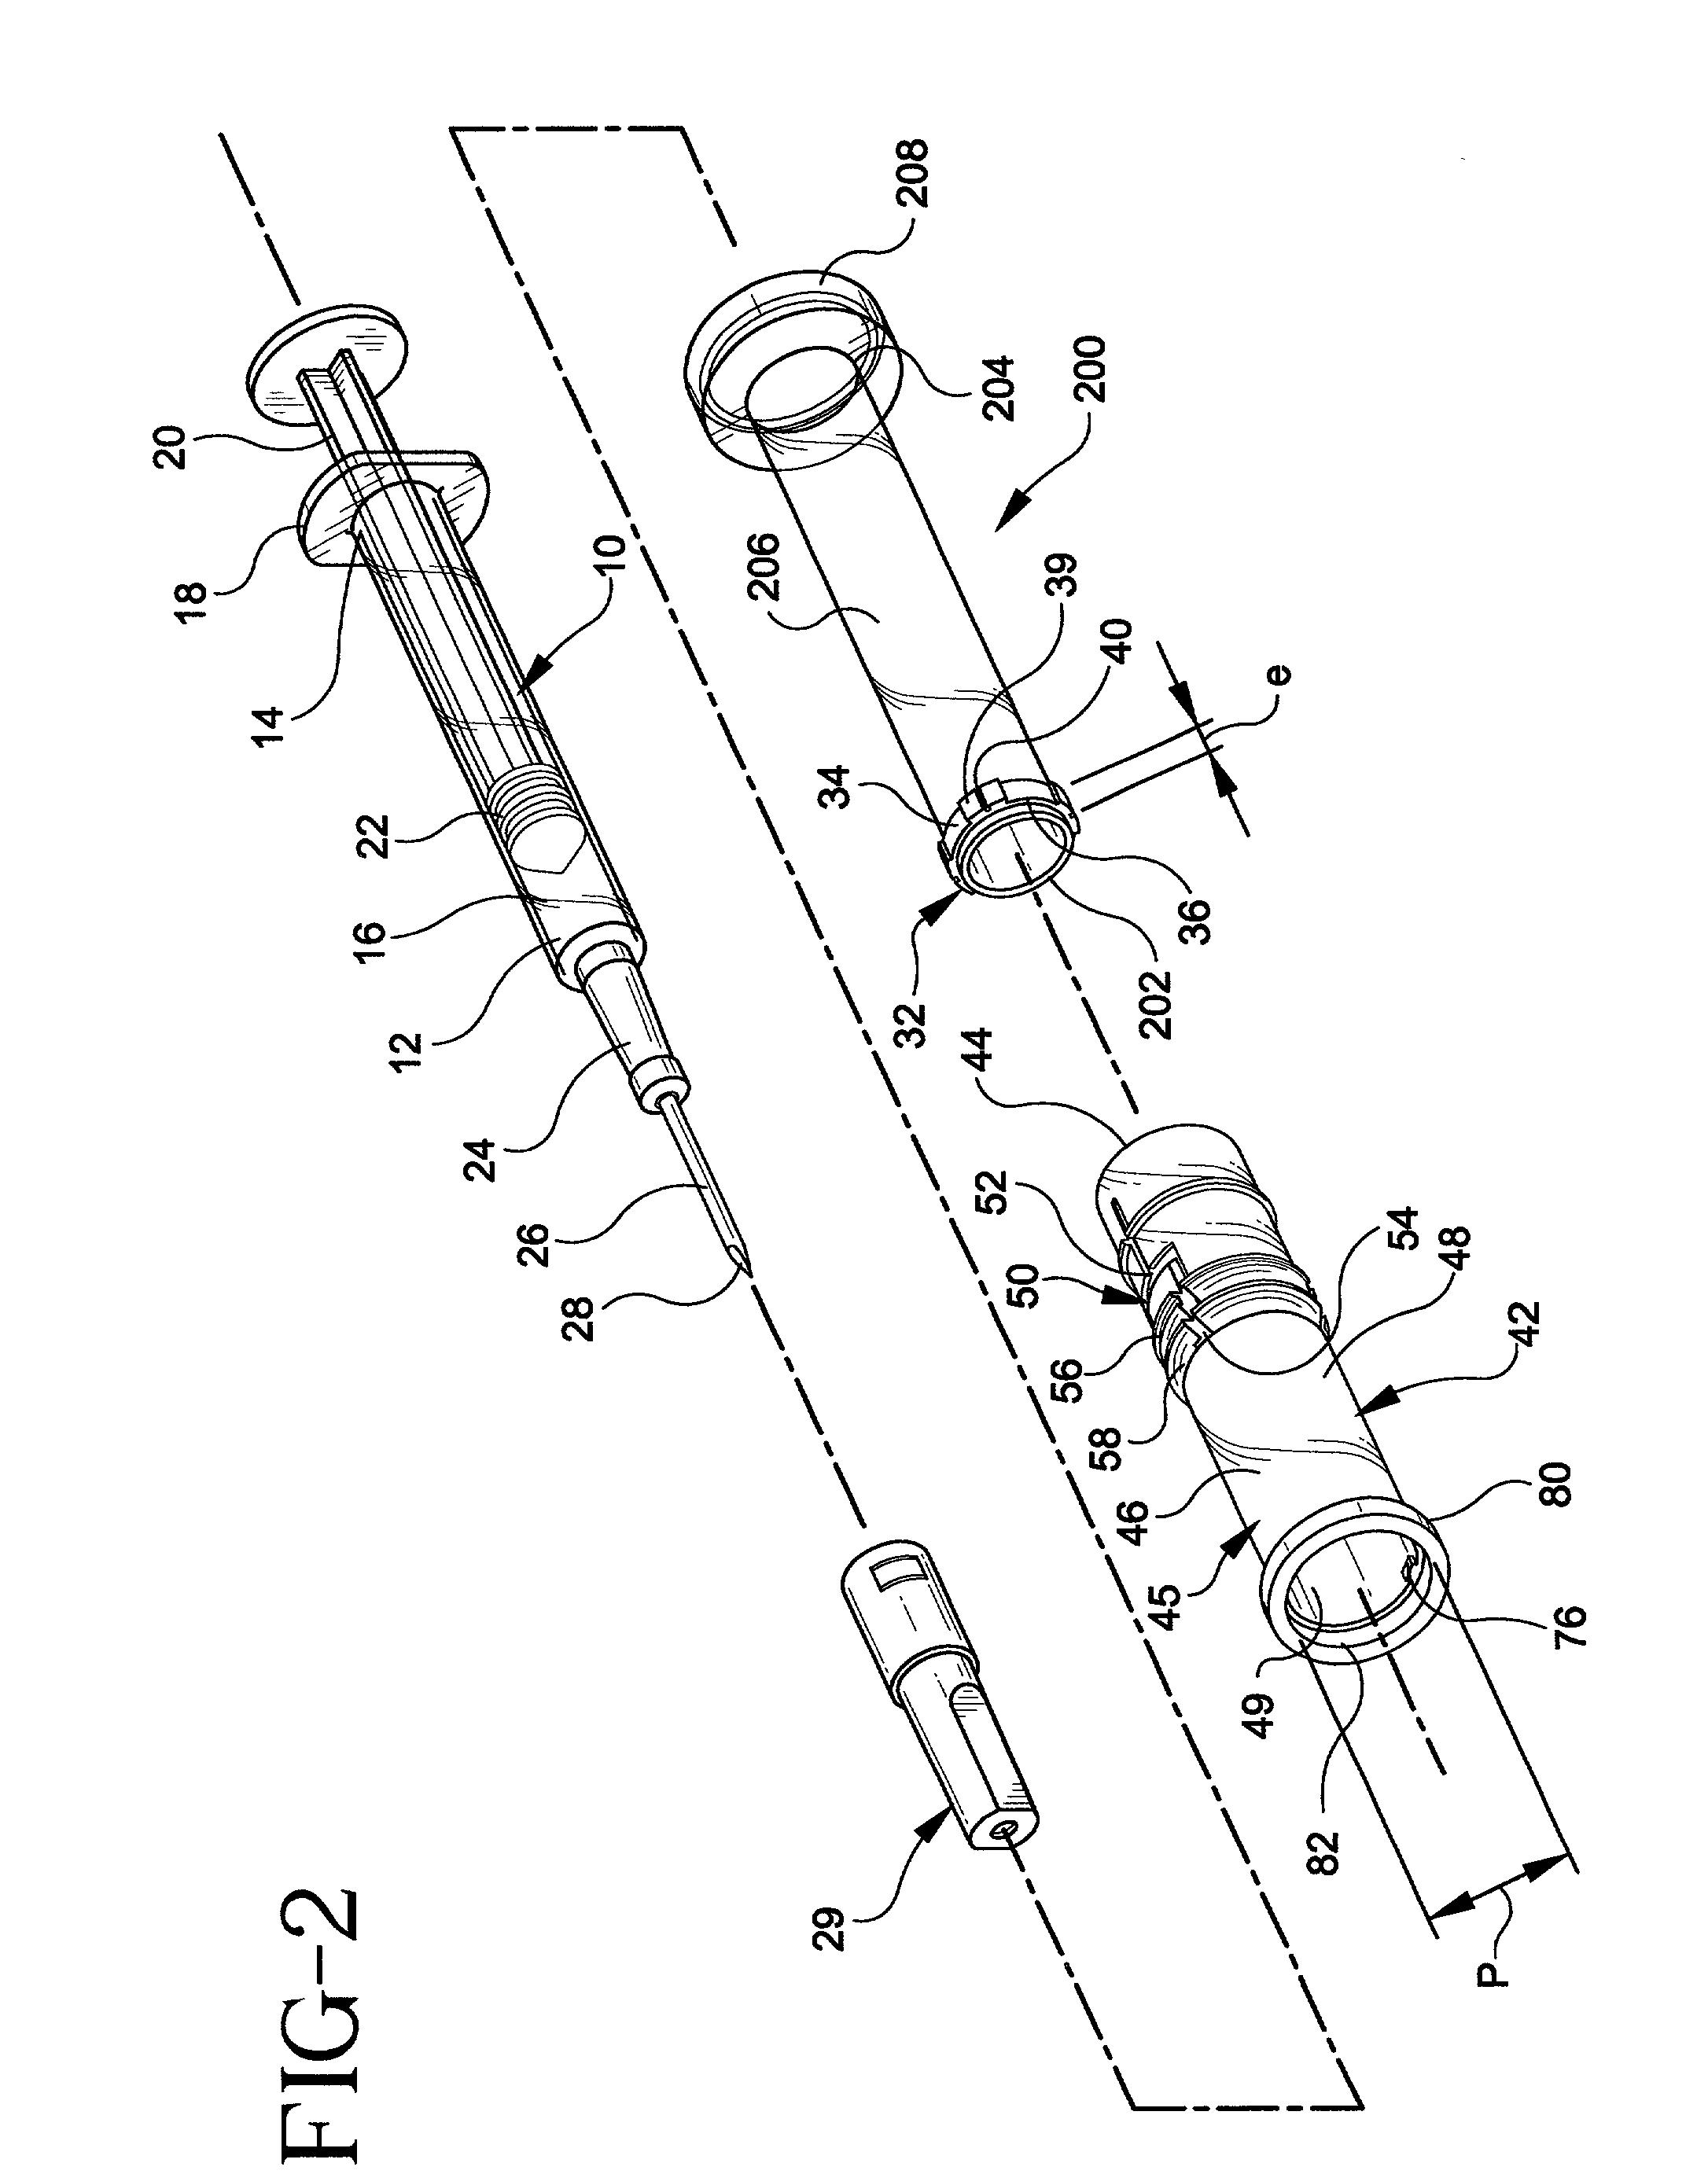 Lockable safety shield assembly for a prefillable syringe